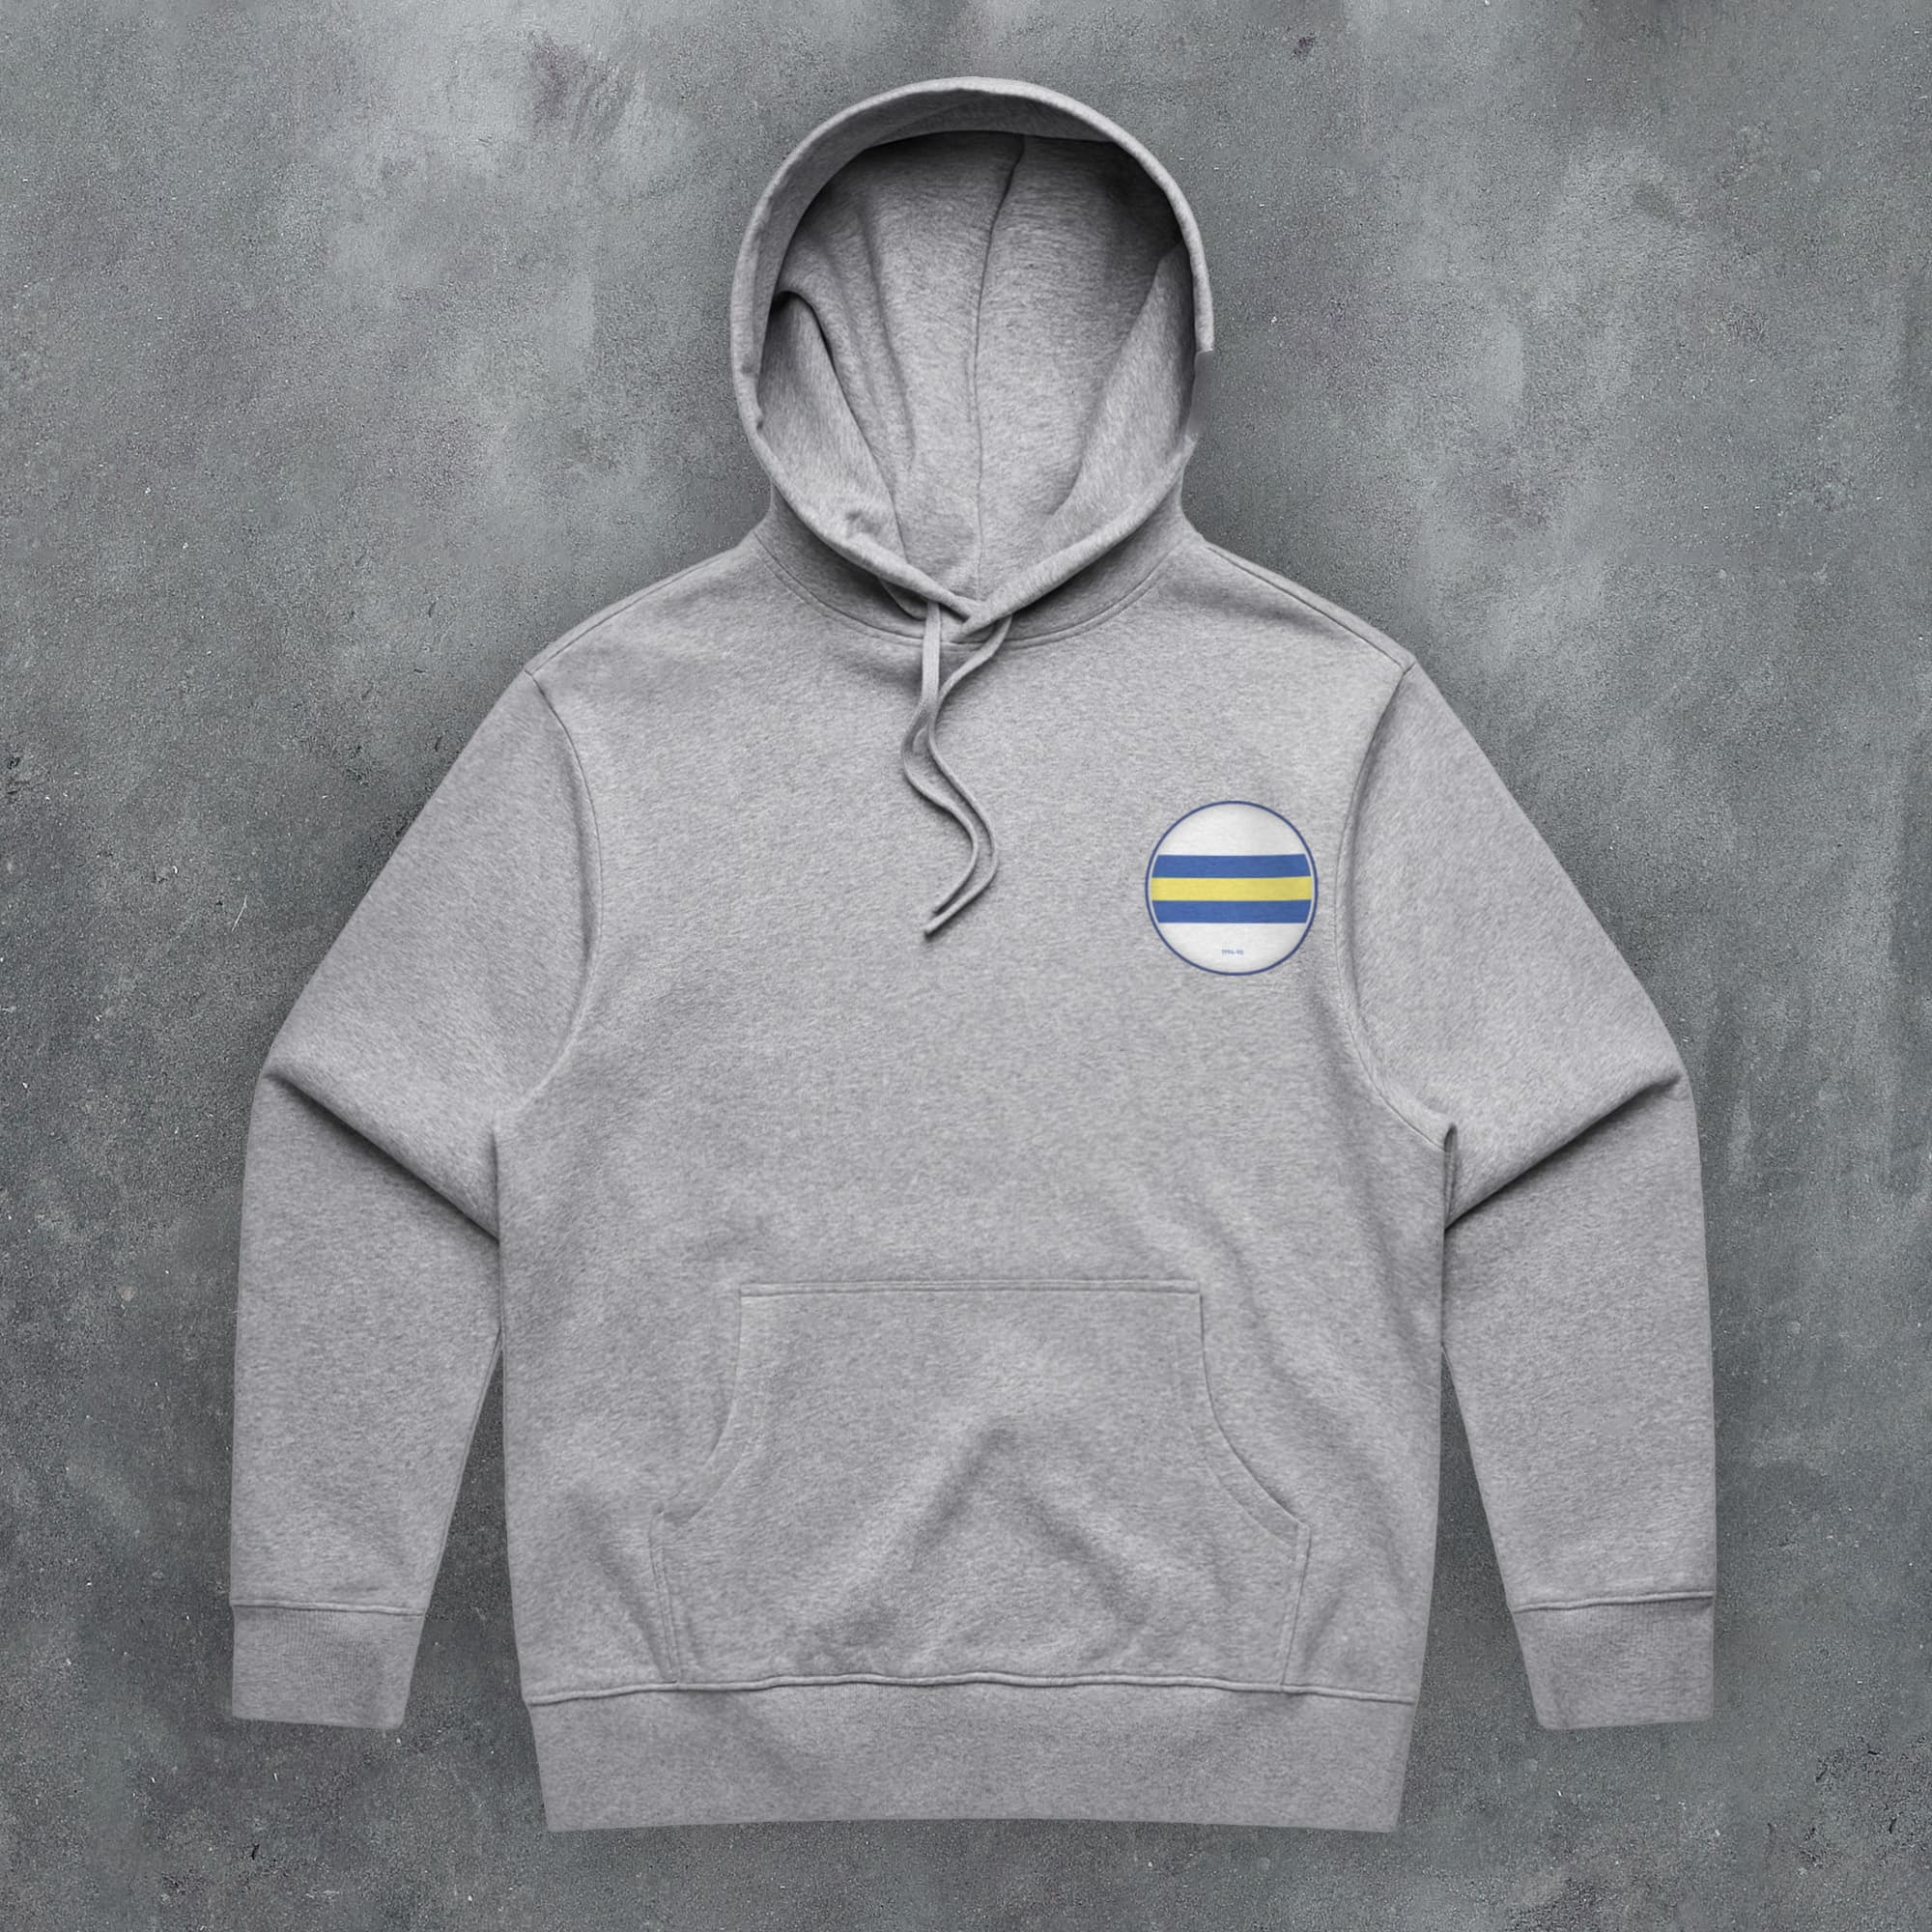 a grey hoodie with a blue and yellow stripe on it